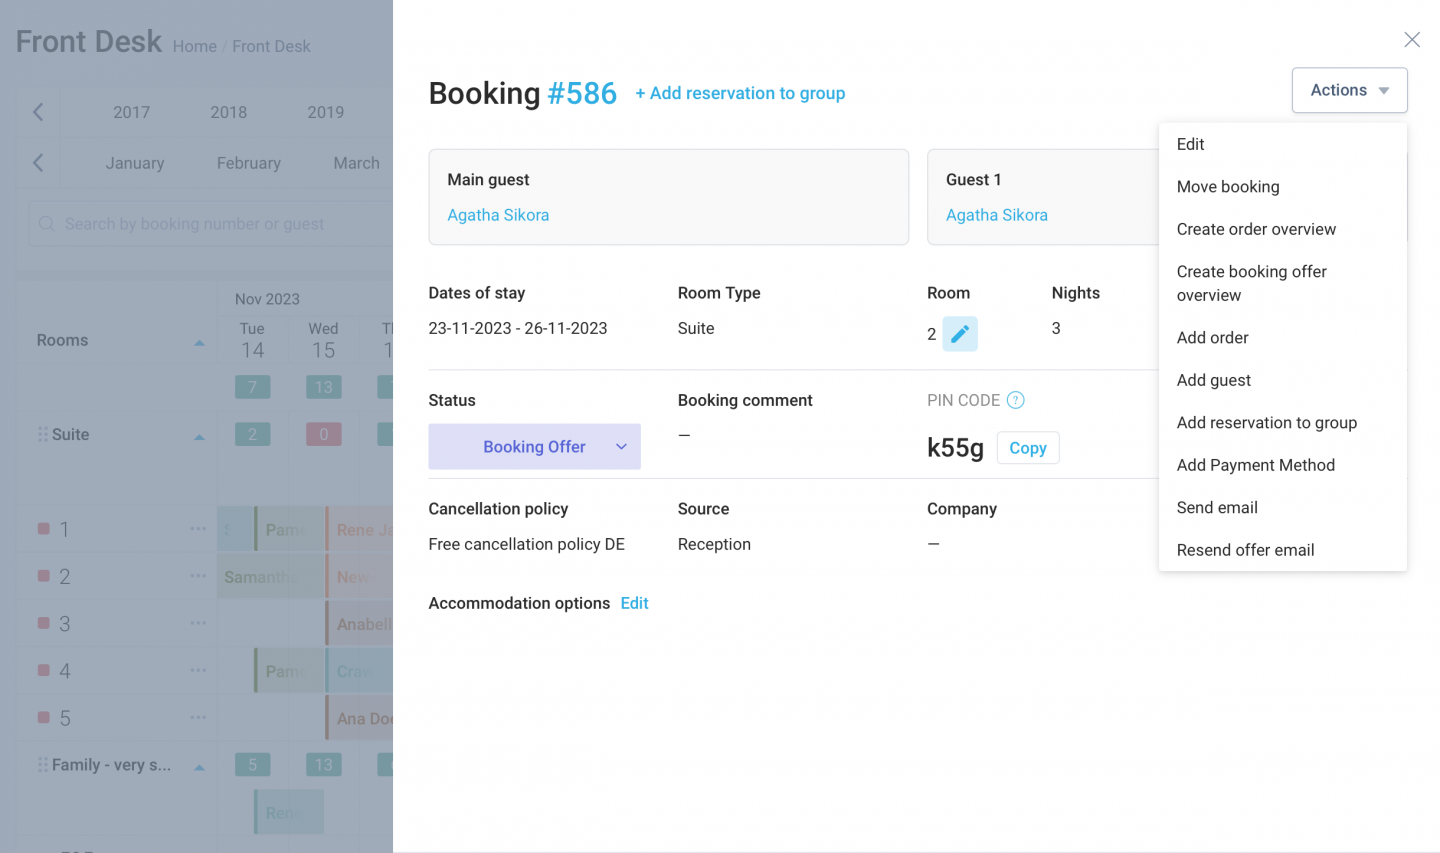 Greater flexibility for “Booking Offer” reservations